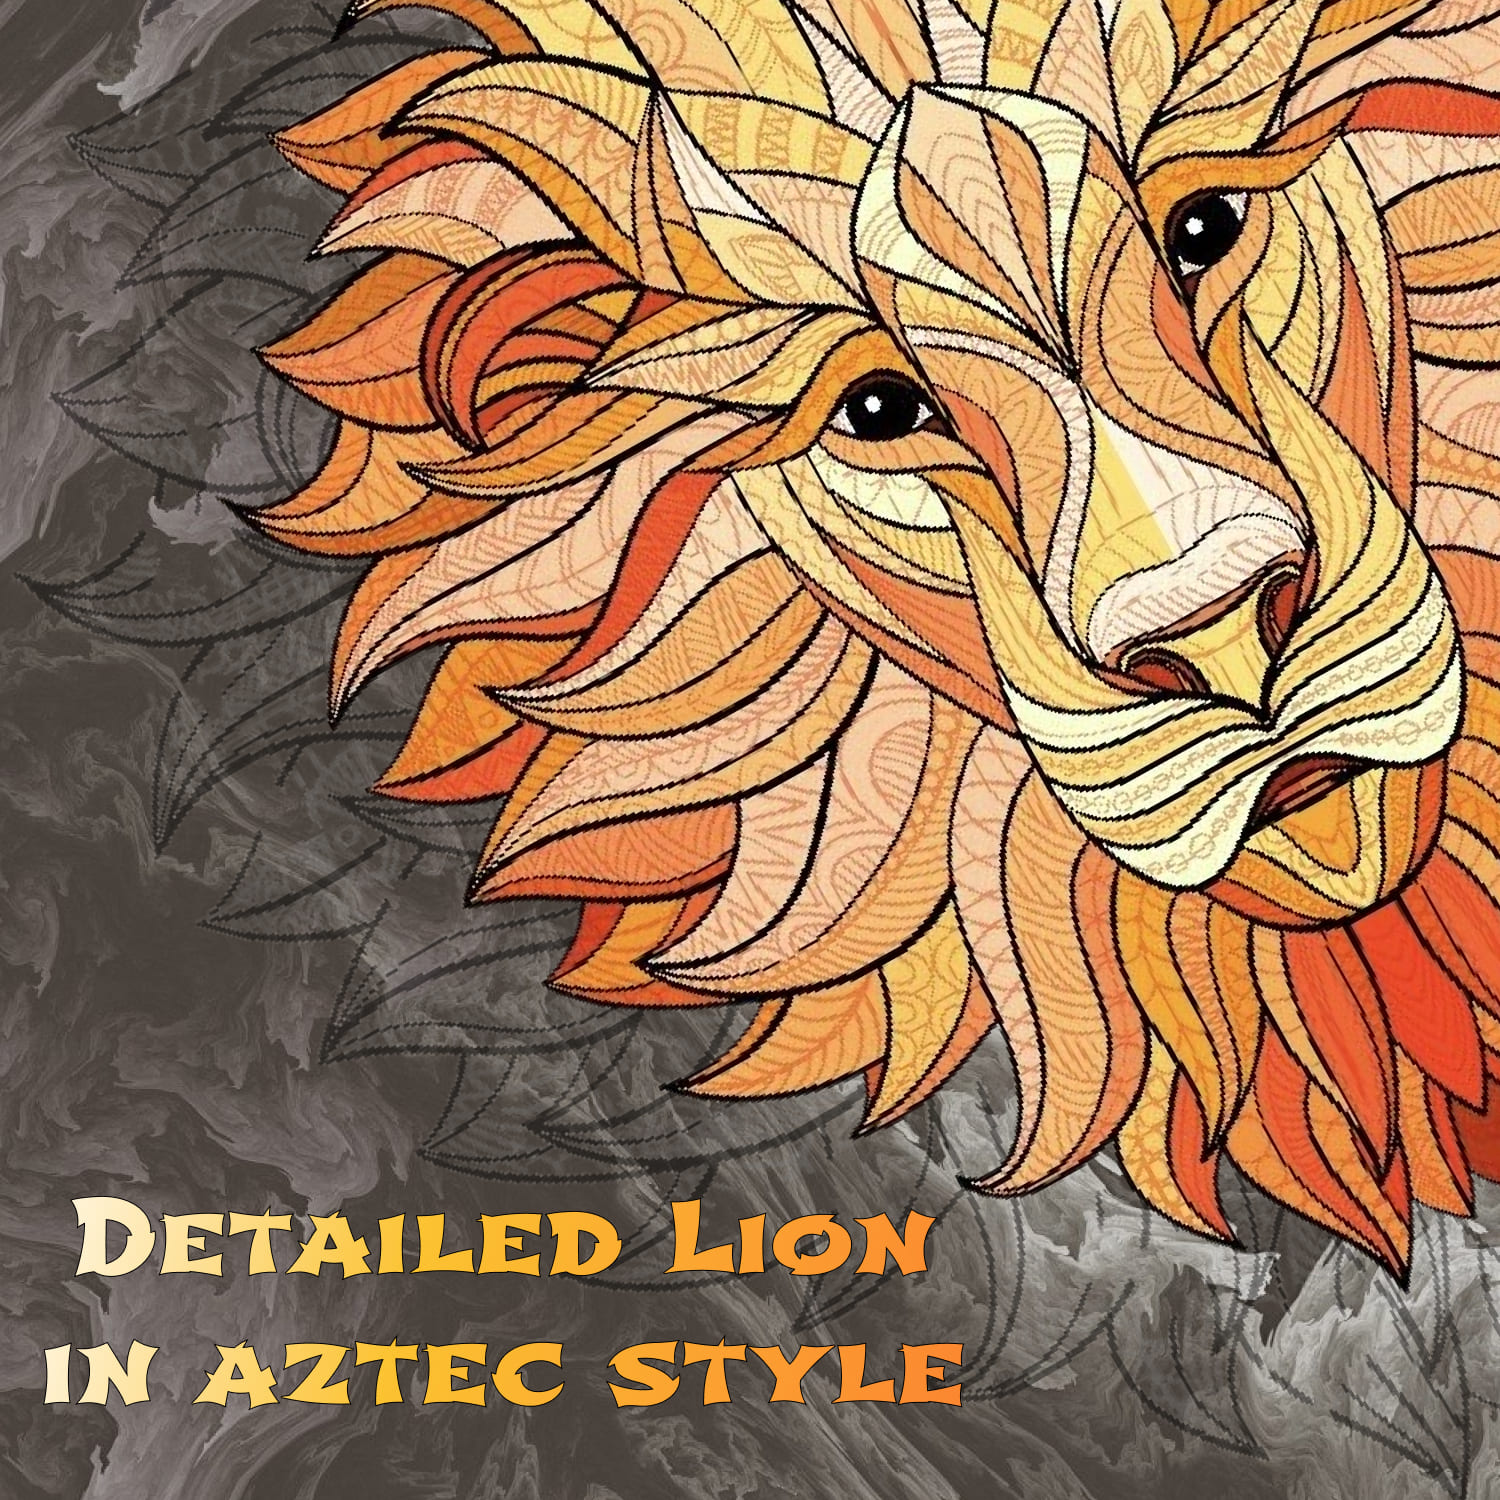 Detailed Lion in aztec style.